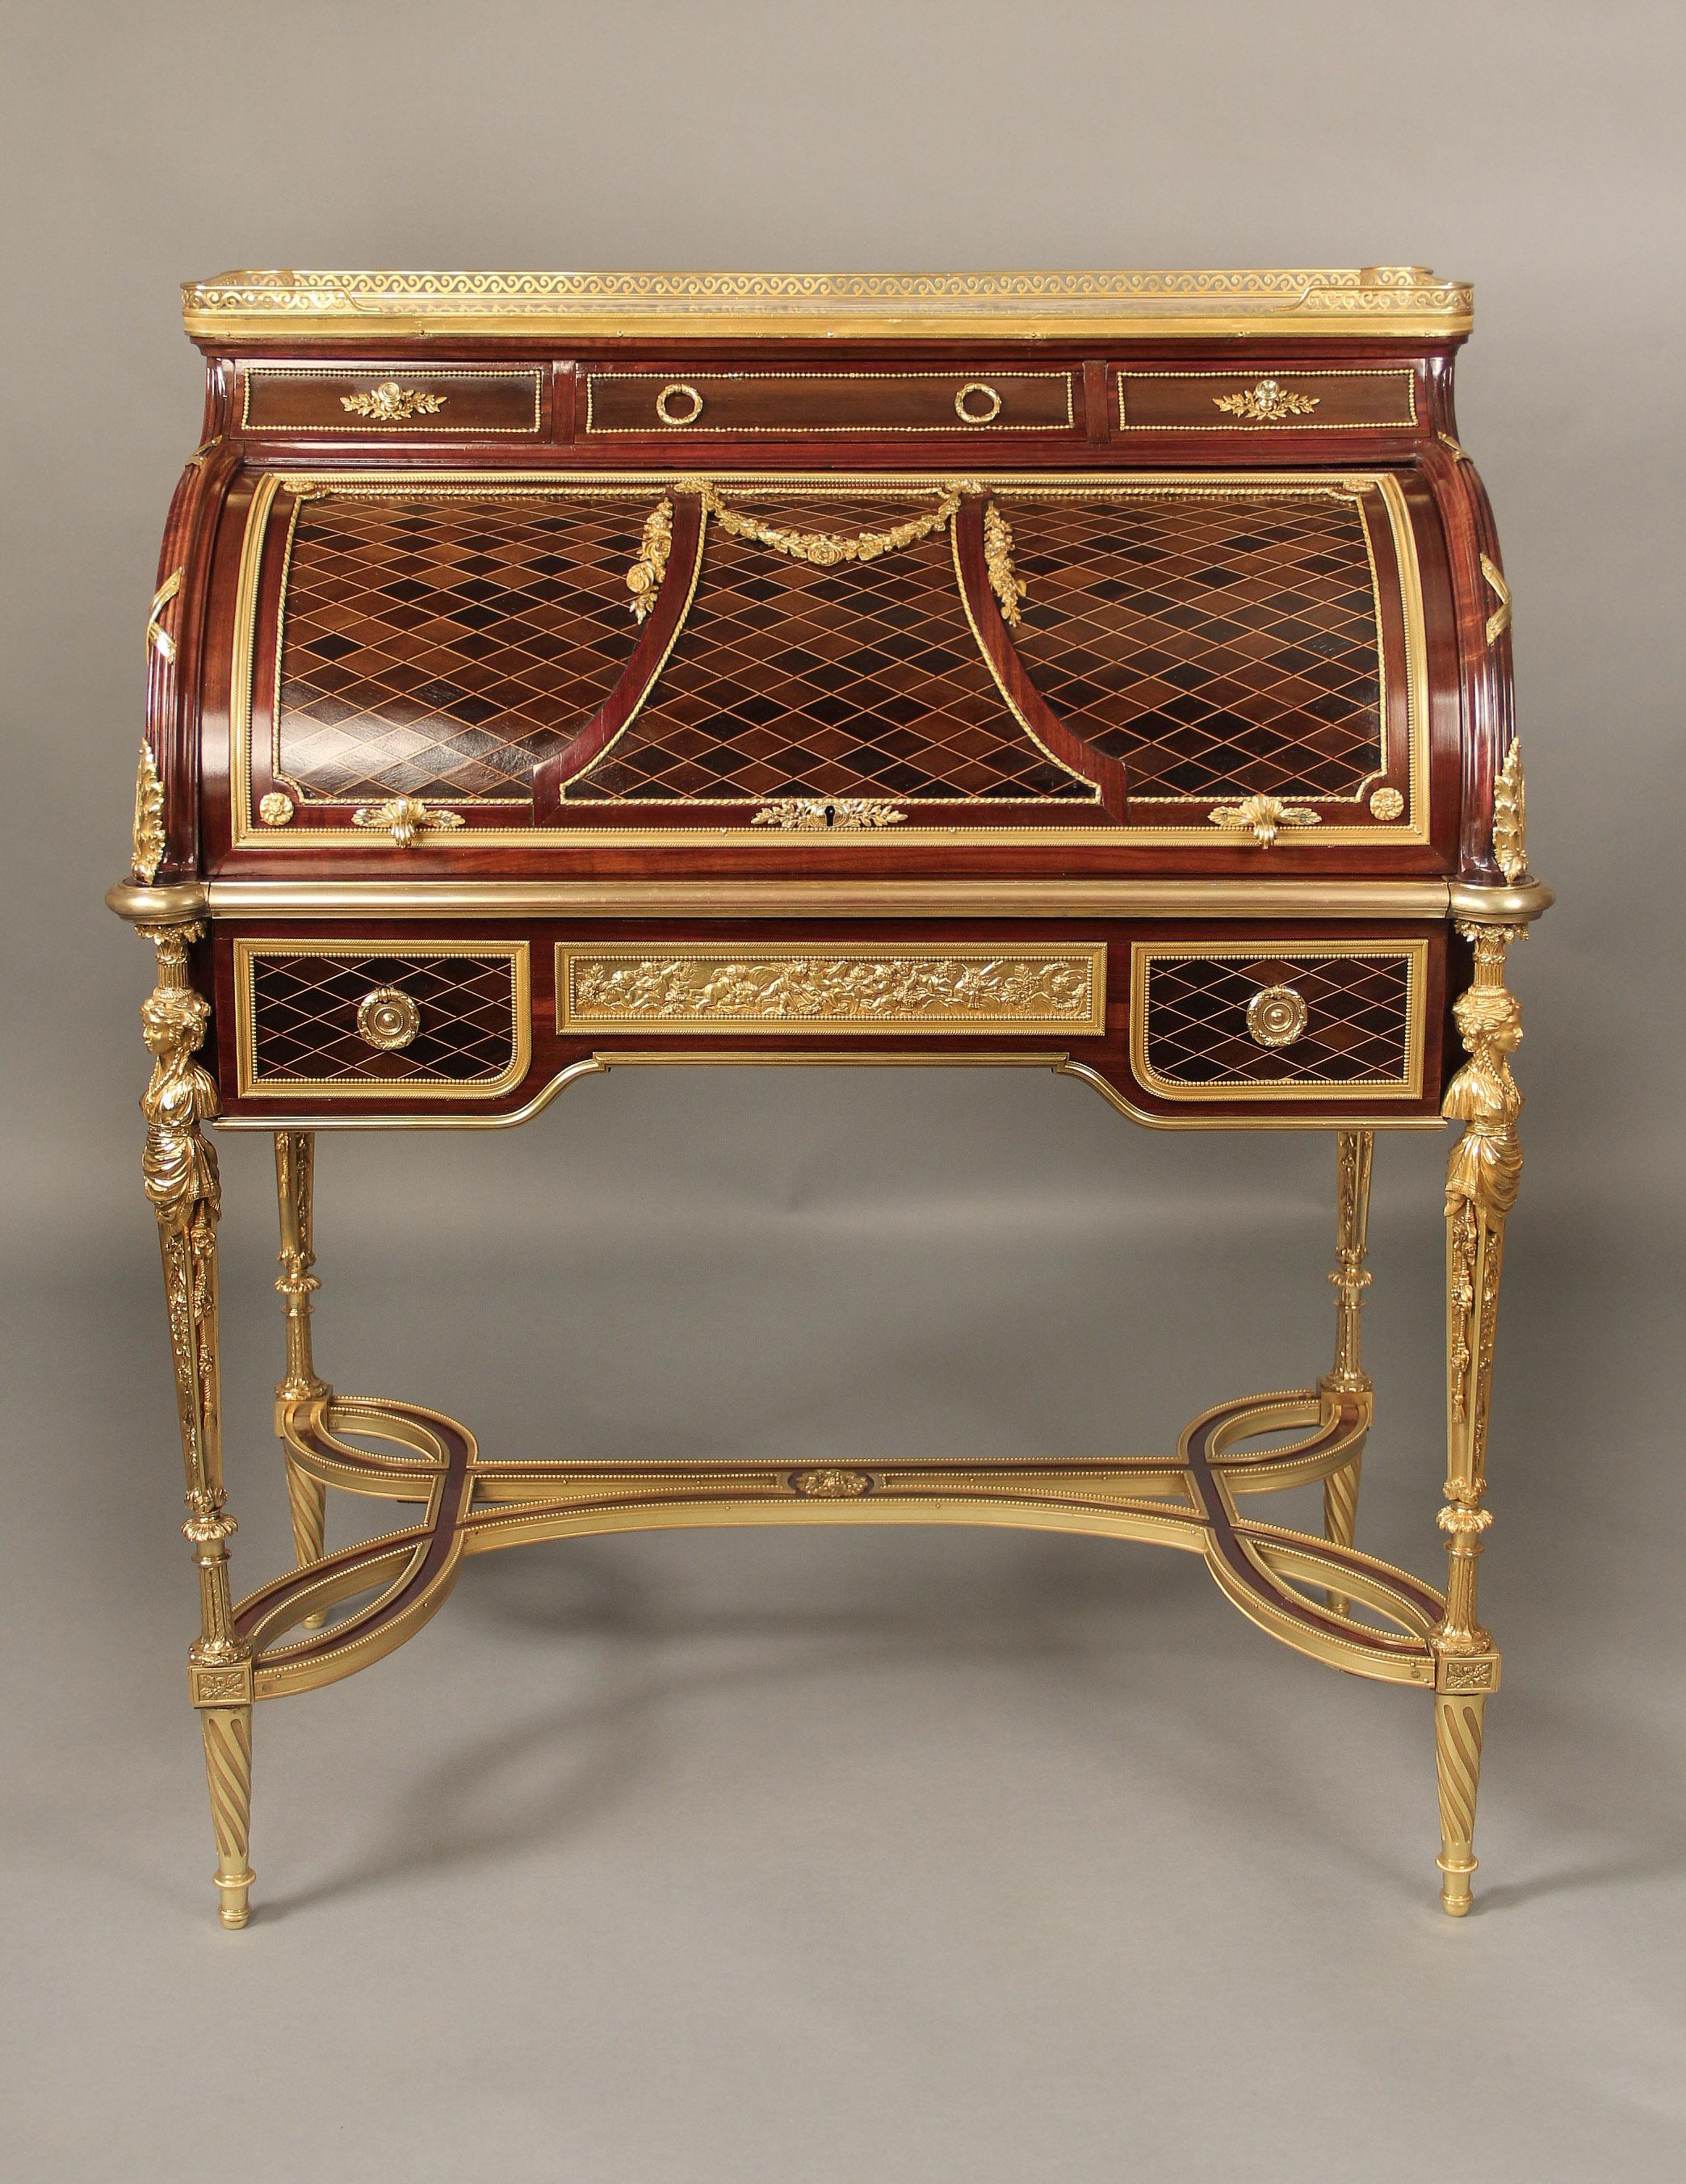 A superb late 19th century gilt bronze mounted Louis XVI style Bureau à Cylindre Possibly François Linke for Maison Krieger

In the manner of Adam Weisweiler

Cajou, platane trellis-parquetry, ébène and buis stringings, the rounded corner marble